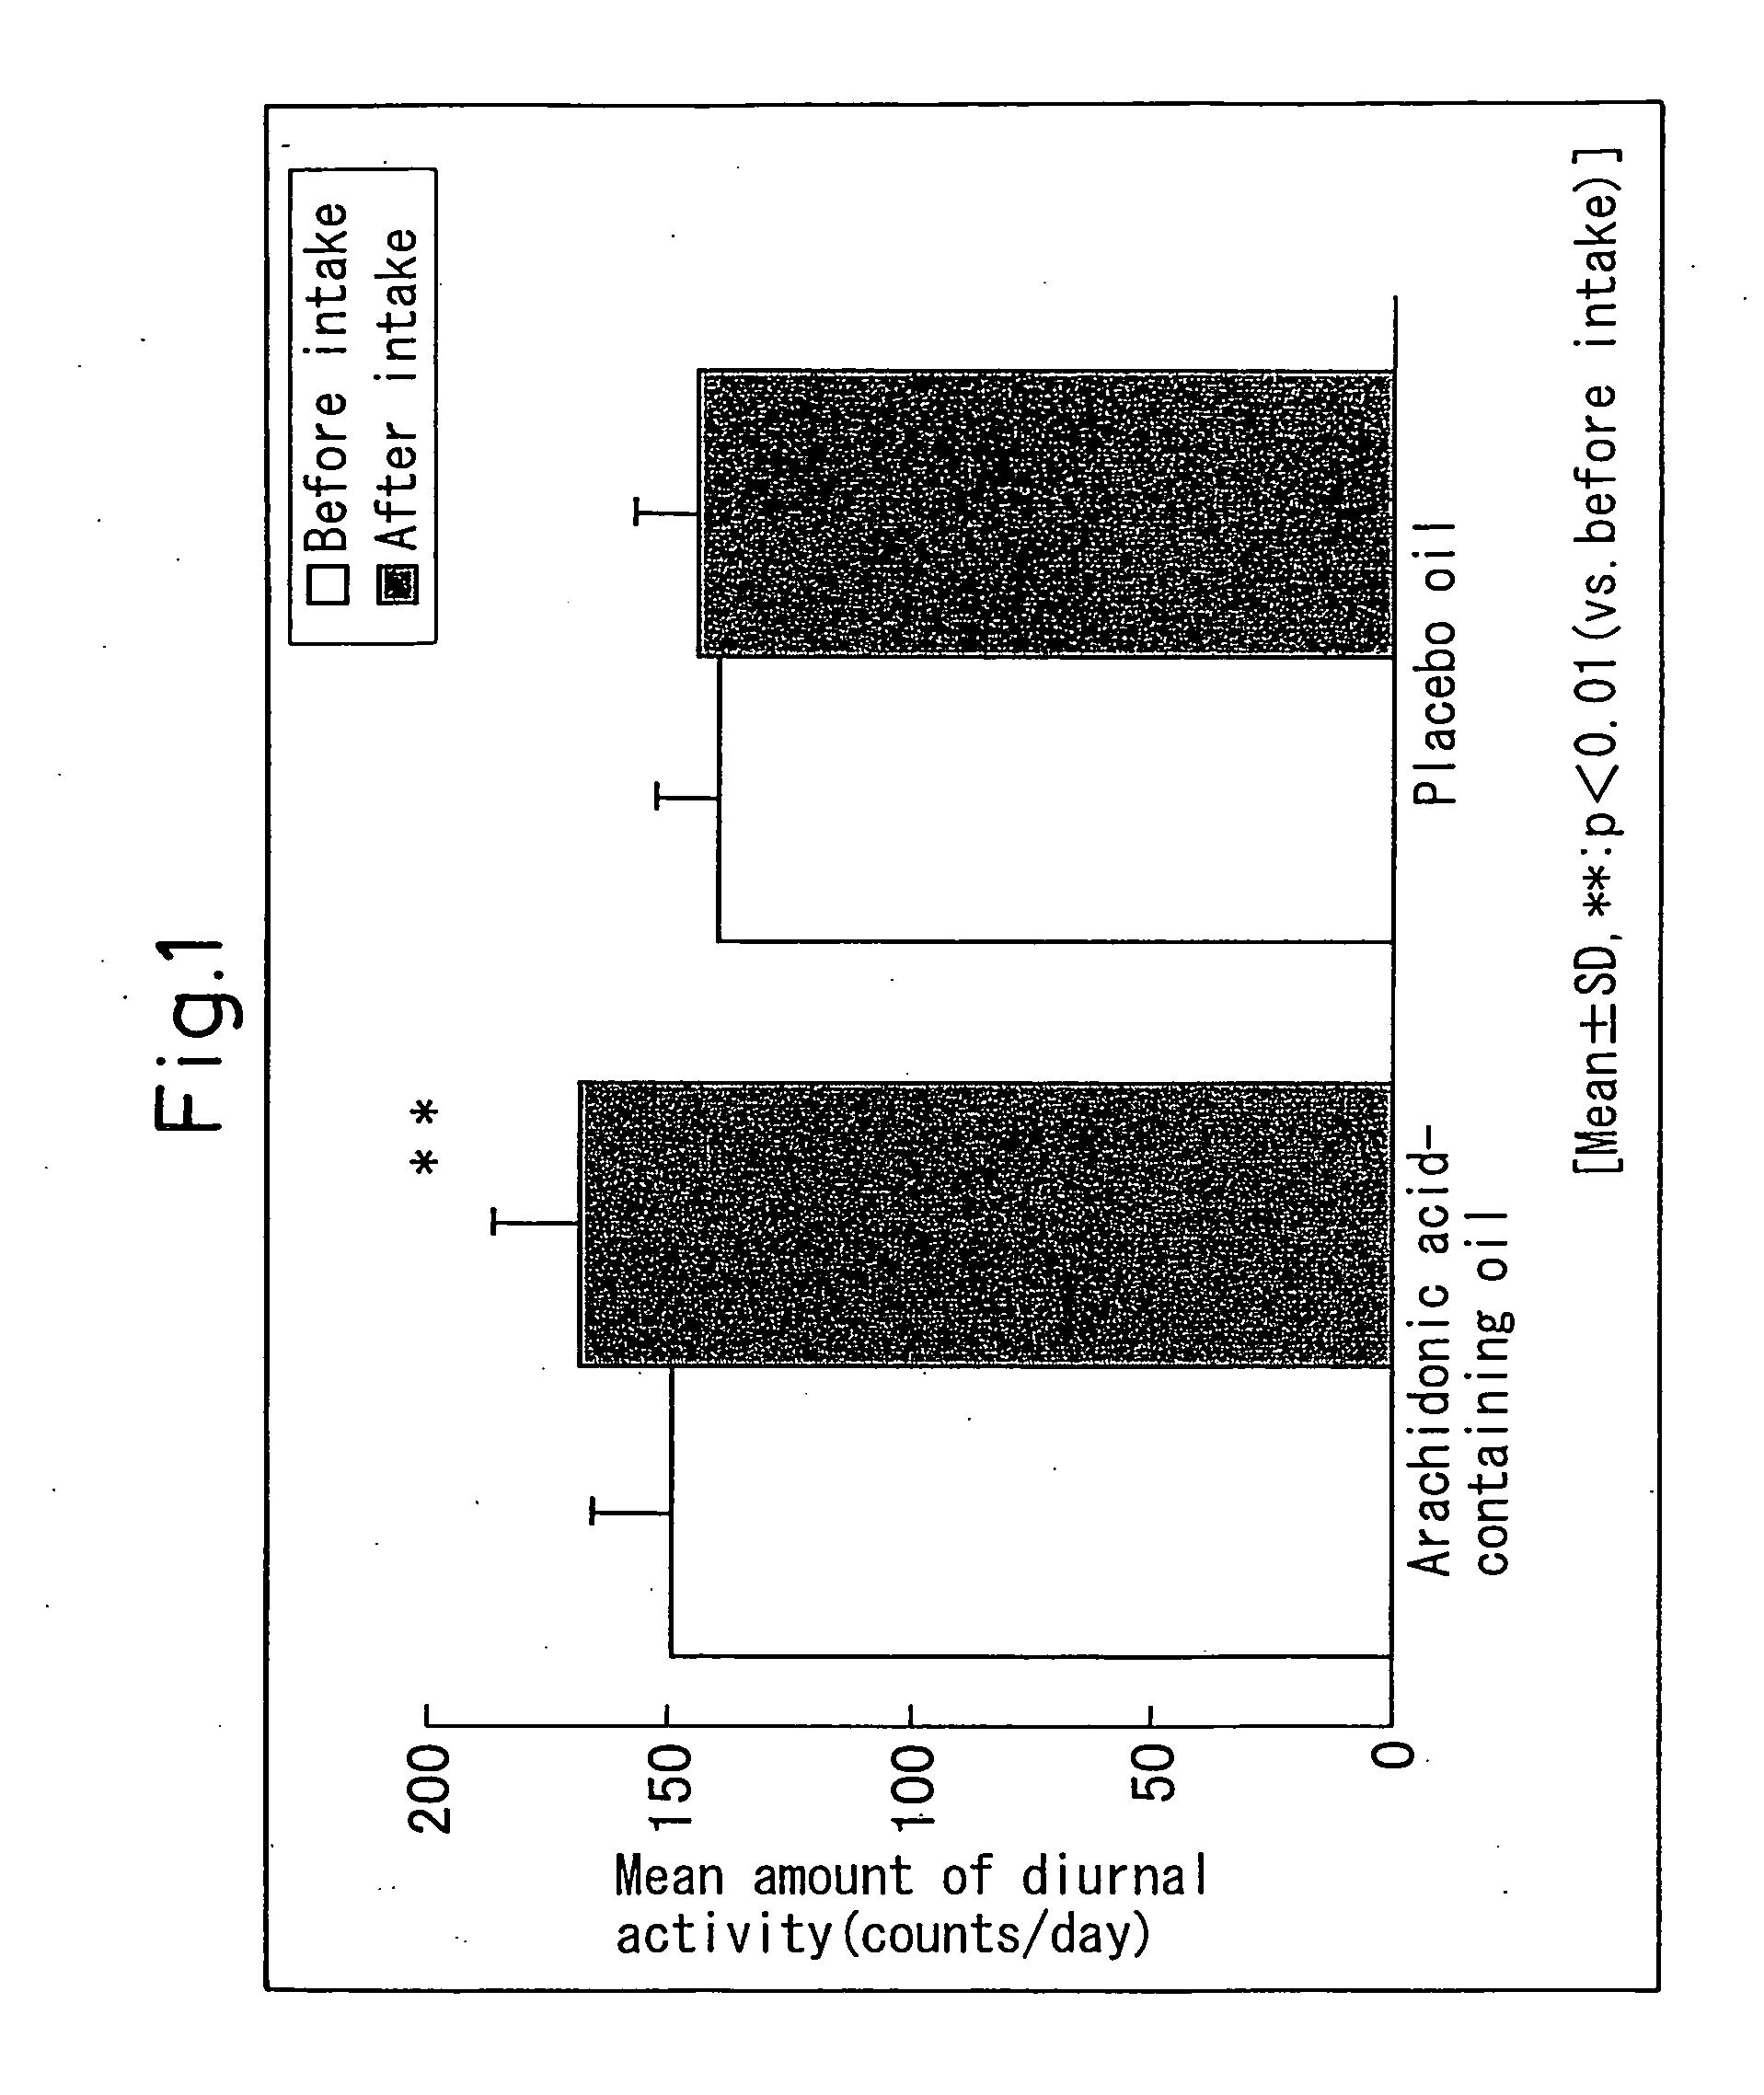 Compositions Ameliorating a Reduced Diurnal Activity and/or Depressive Symptoms